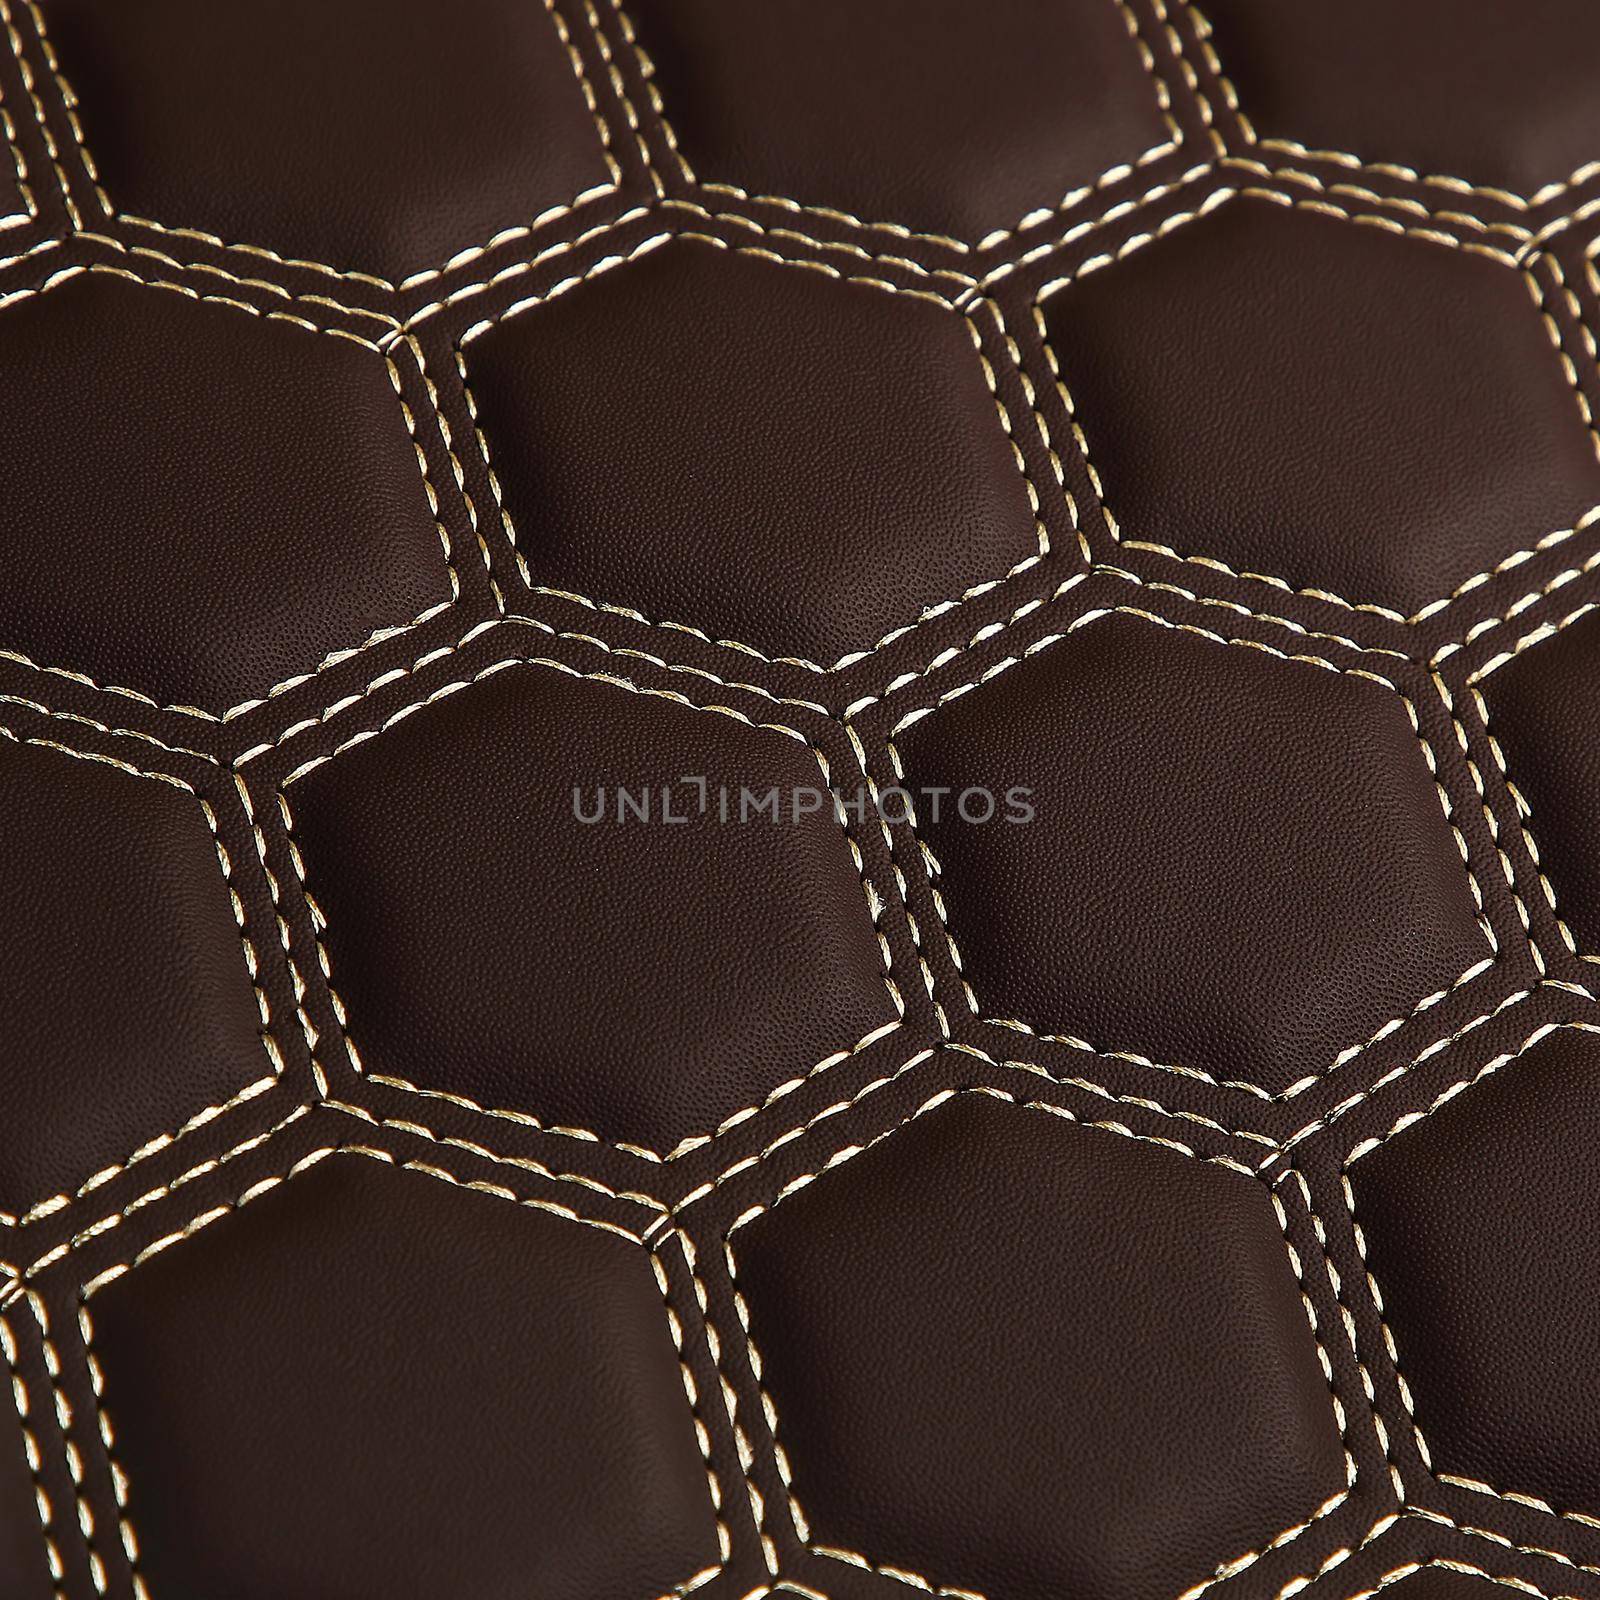 Texture of brown leather background with square pattern and stitch, macro